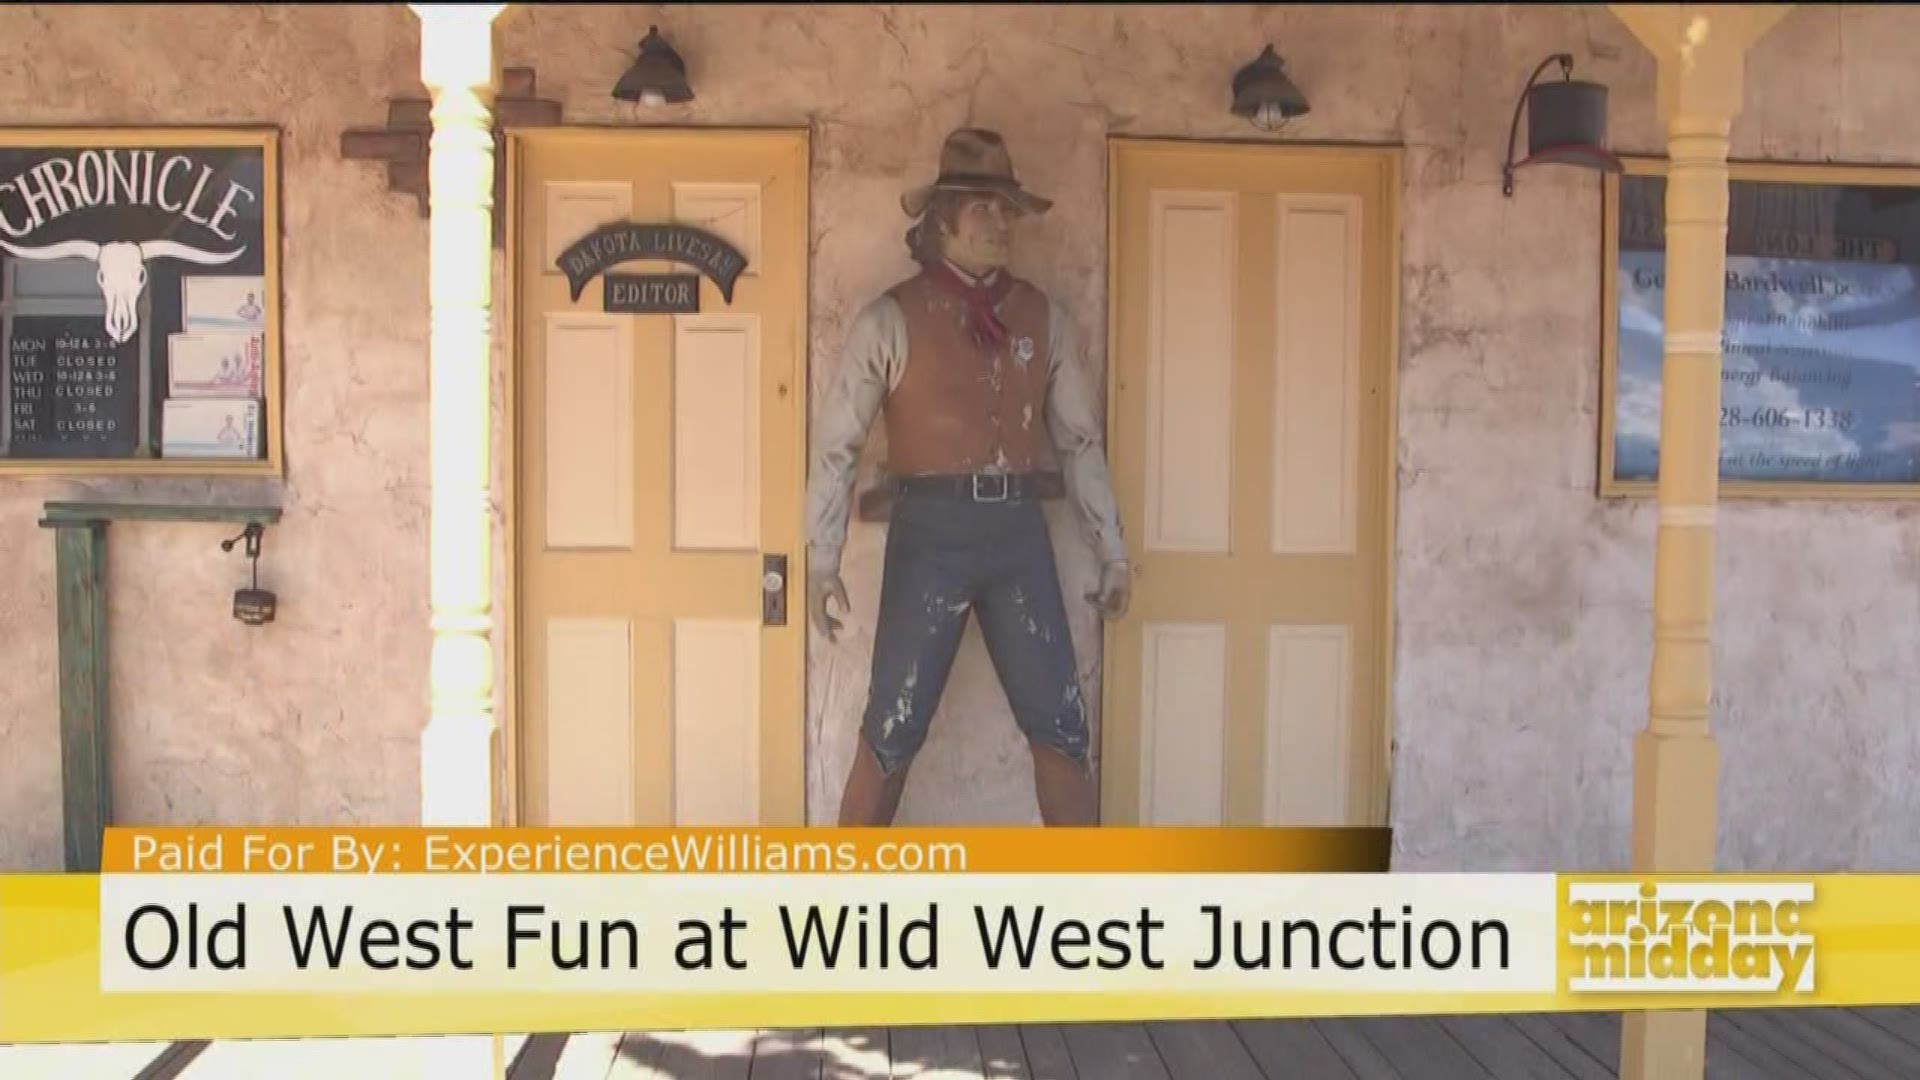 The Mayor of Williams John Moore gives us an inside look at Wild West Juction, where cowboys and the old west come to life.